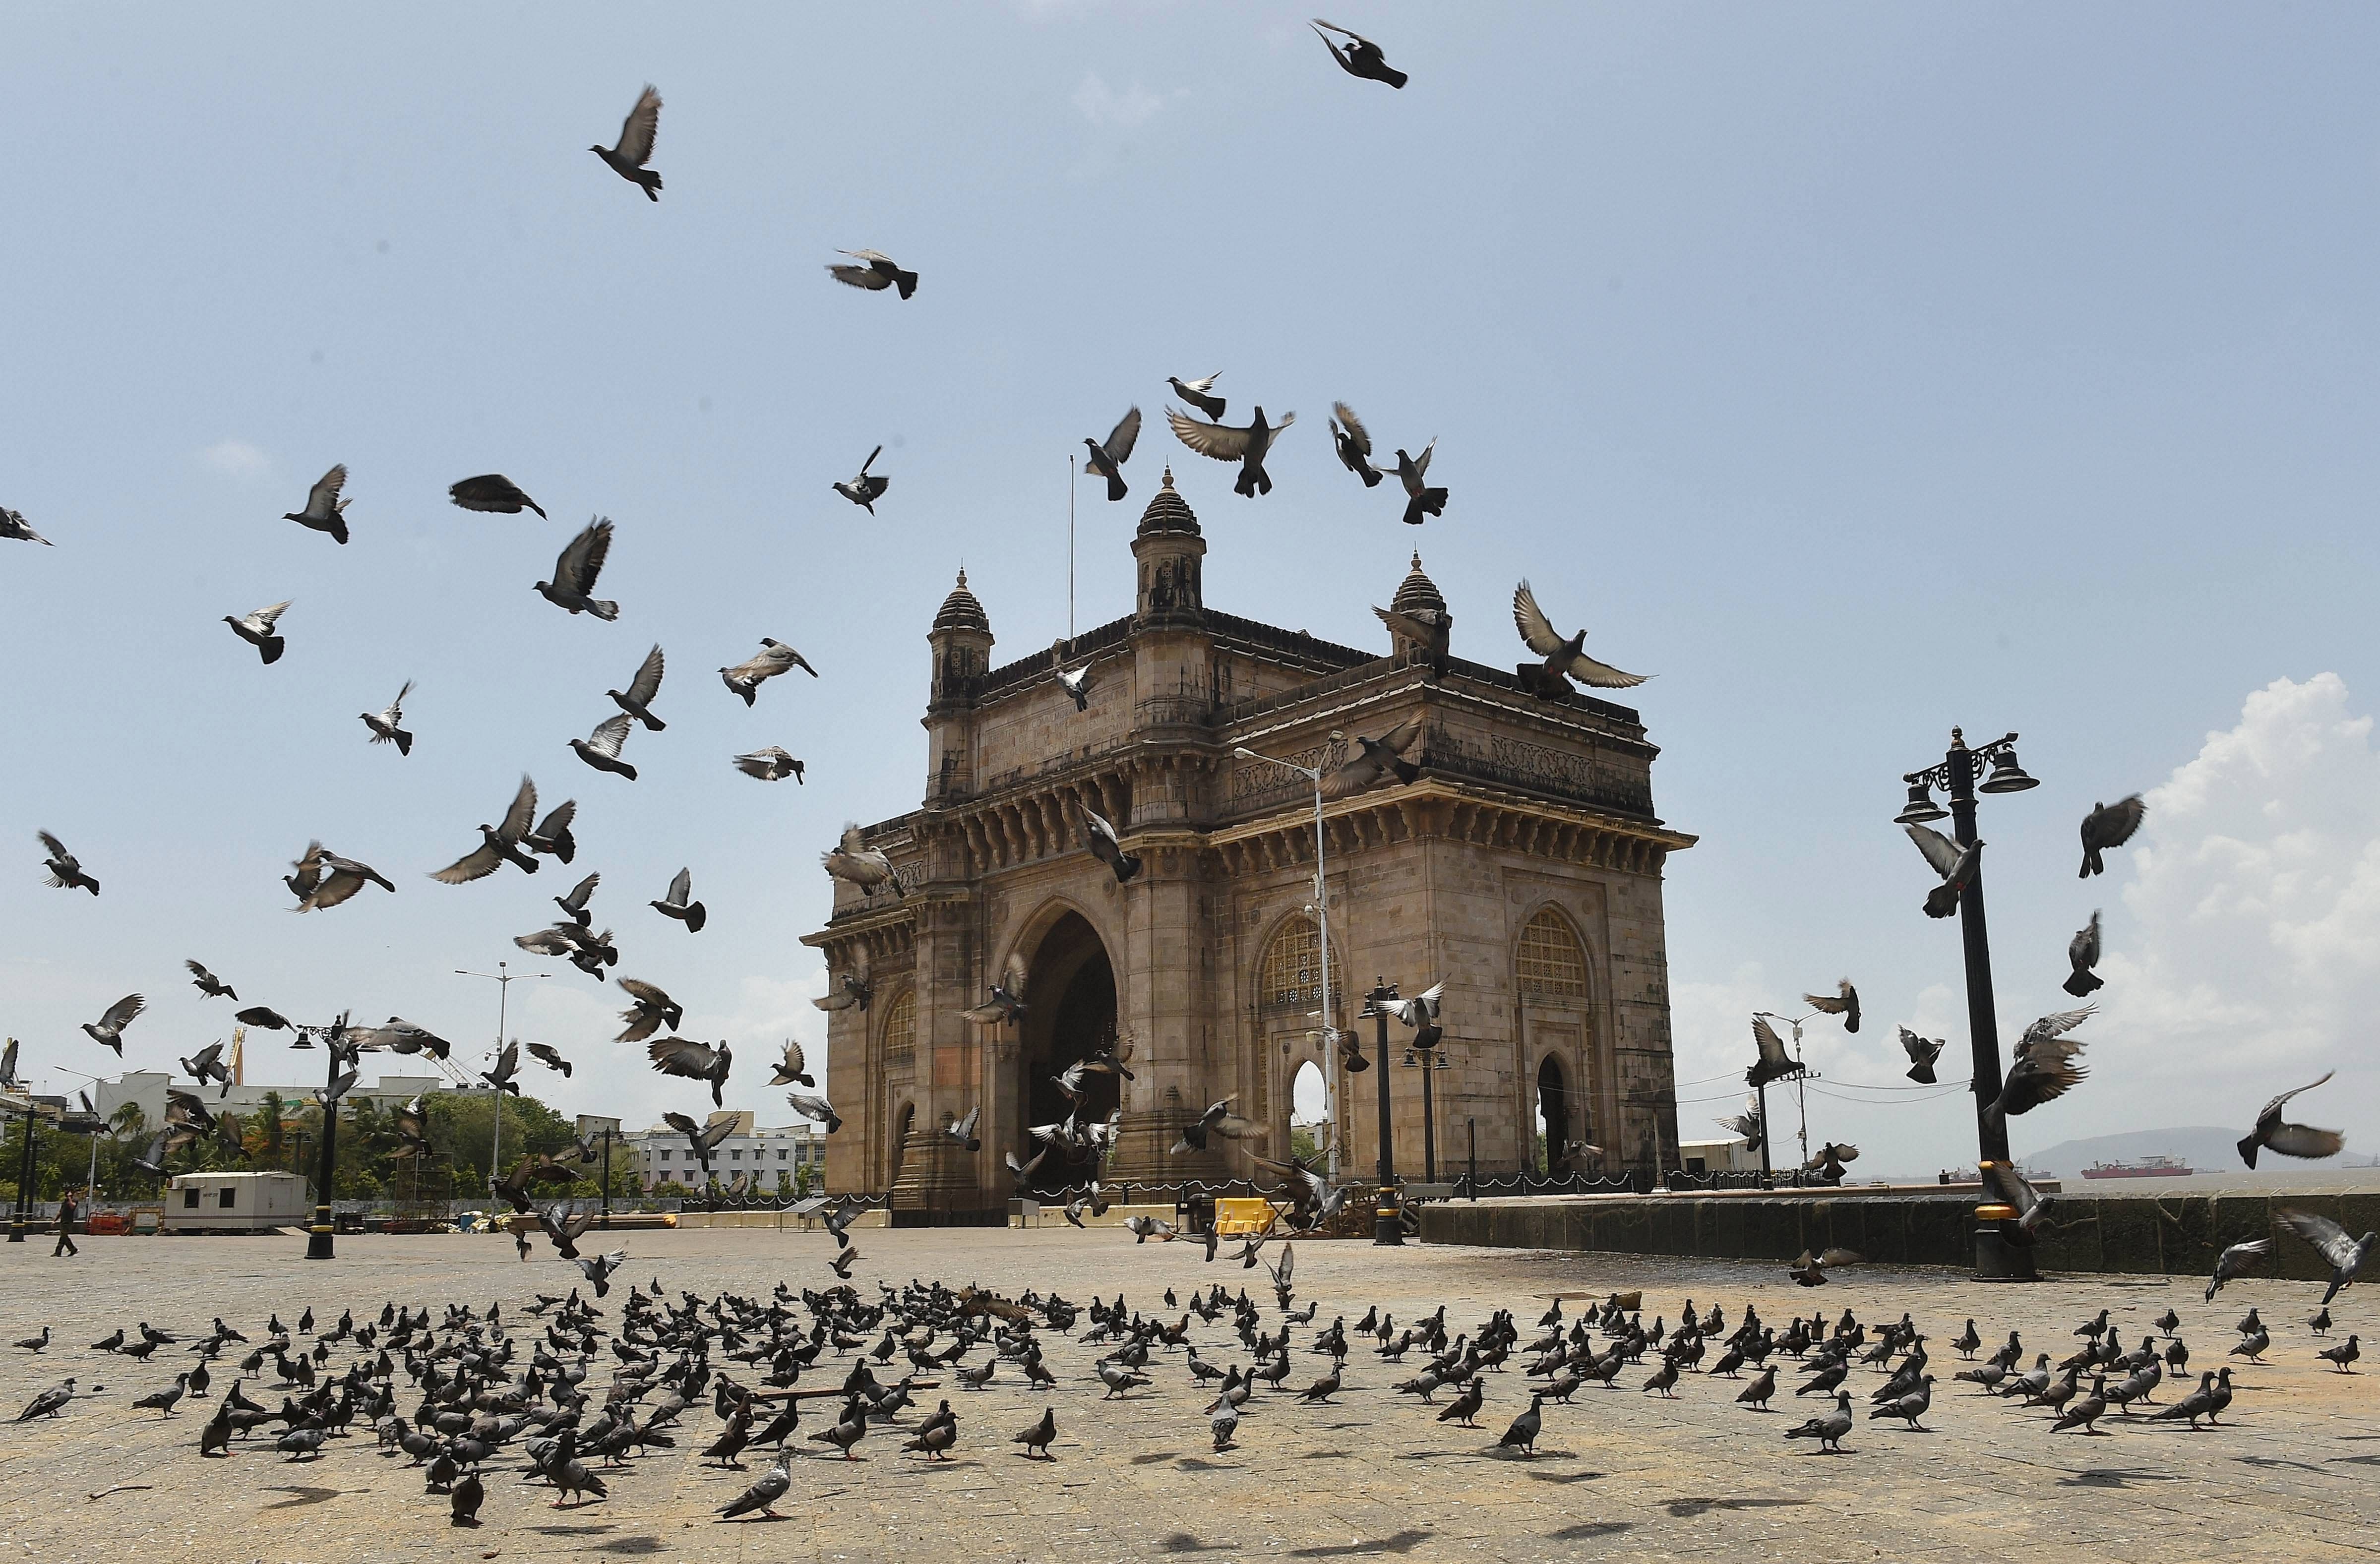 Pigeons fly in front of the Gateway of India during the ongoing Covid-19 lockdown, in Mumbai. (PTI Photo)